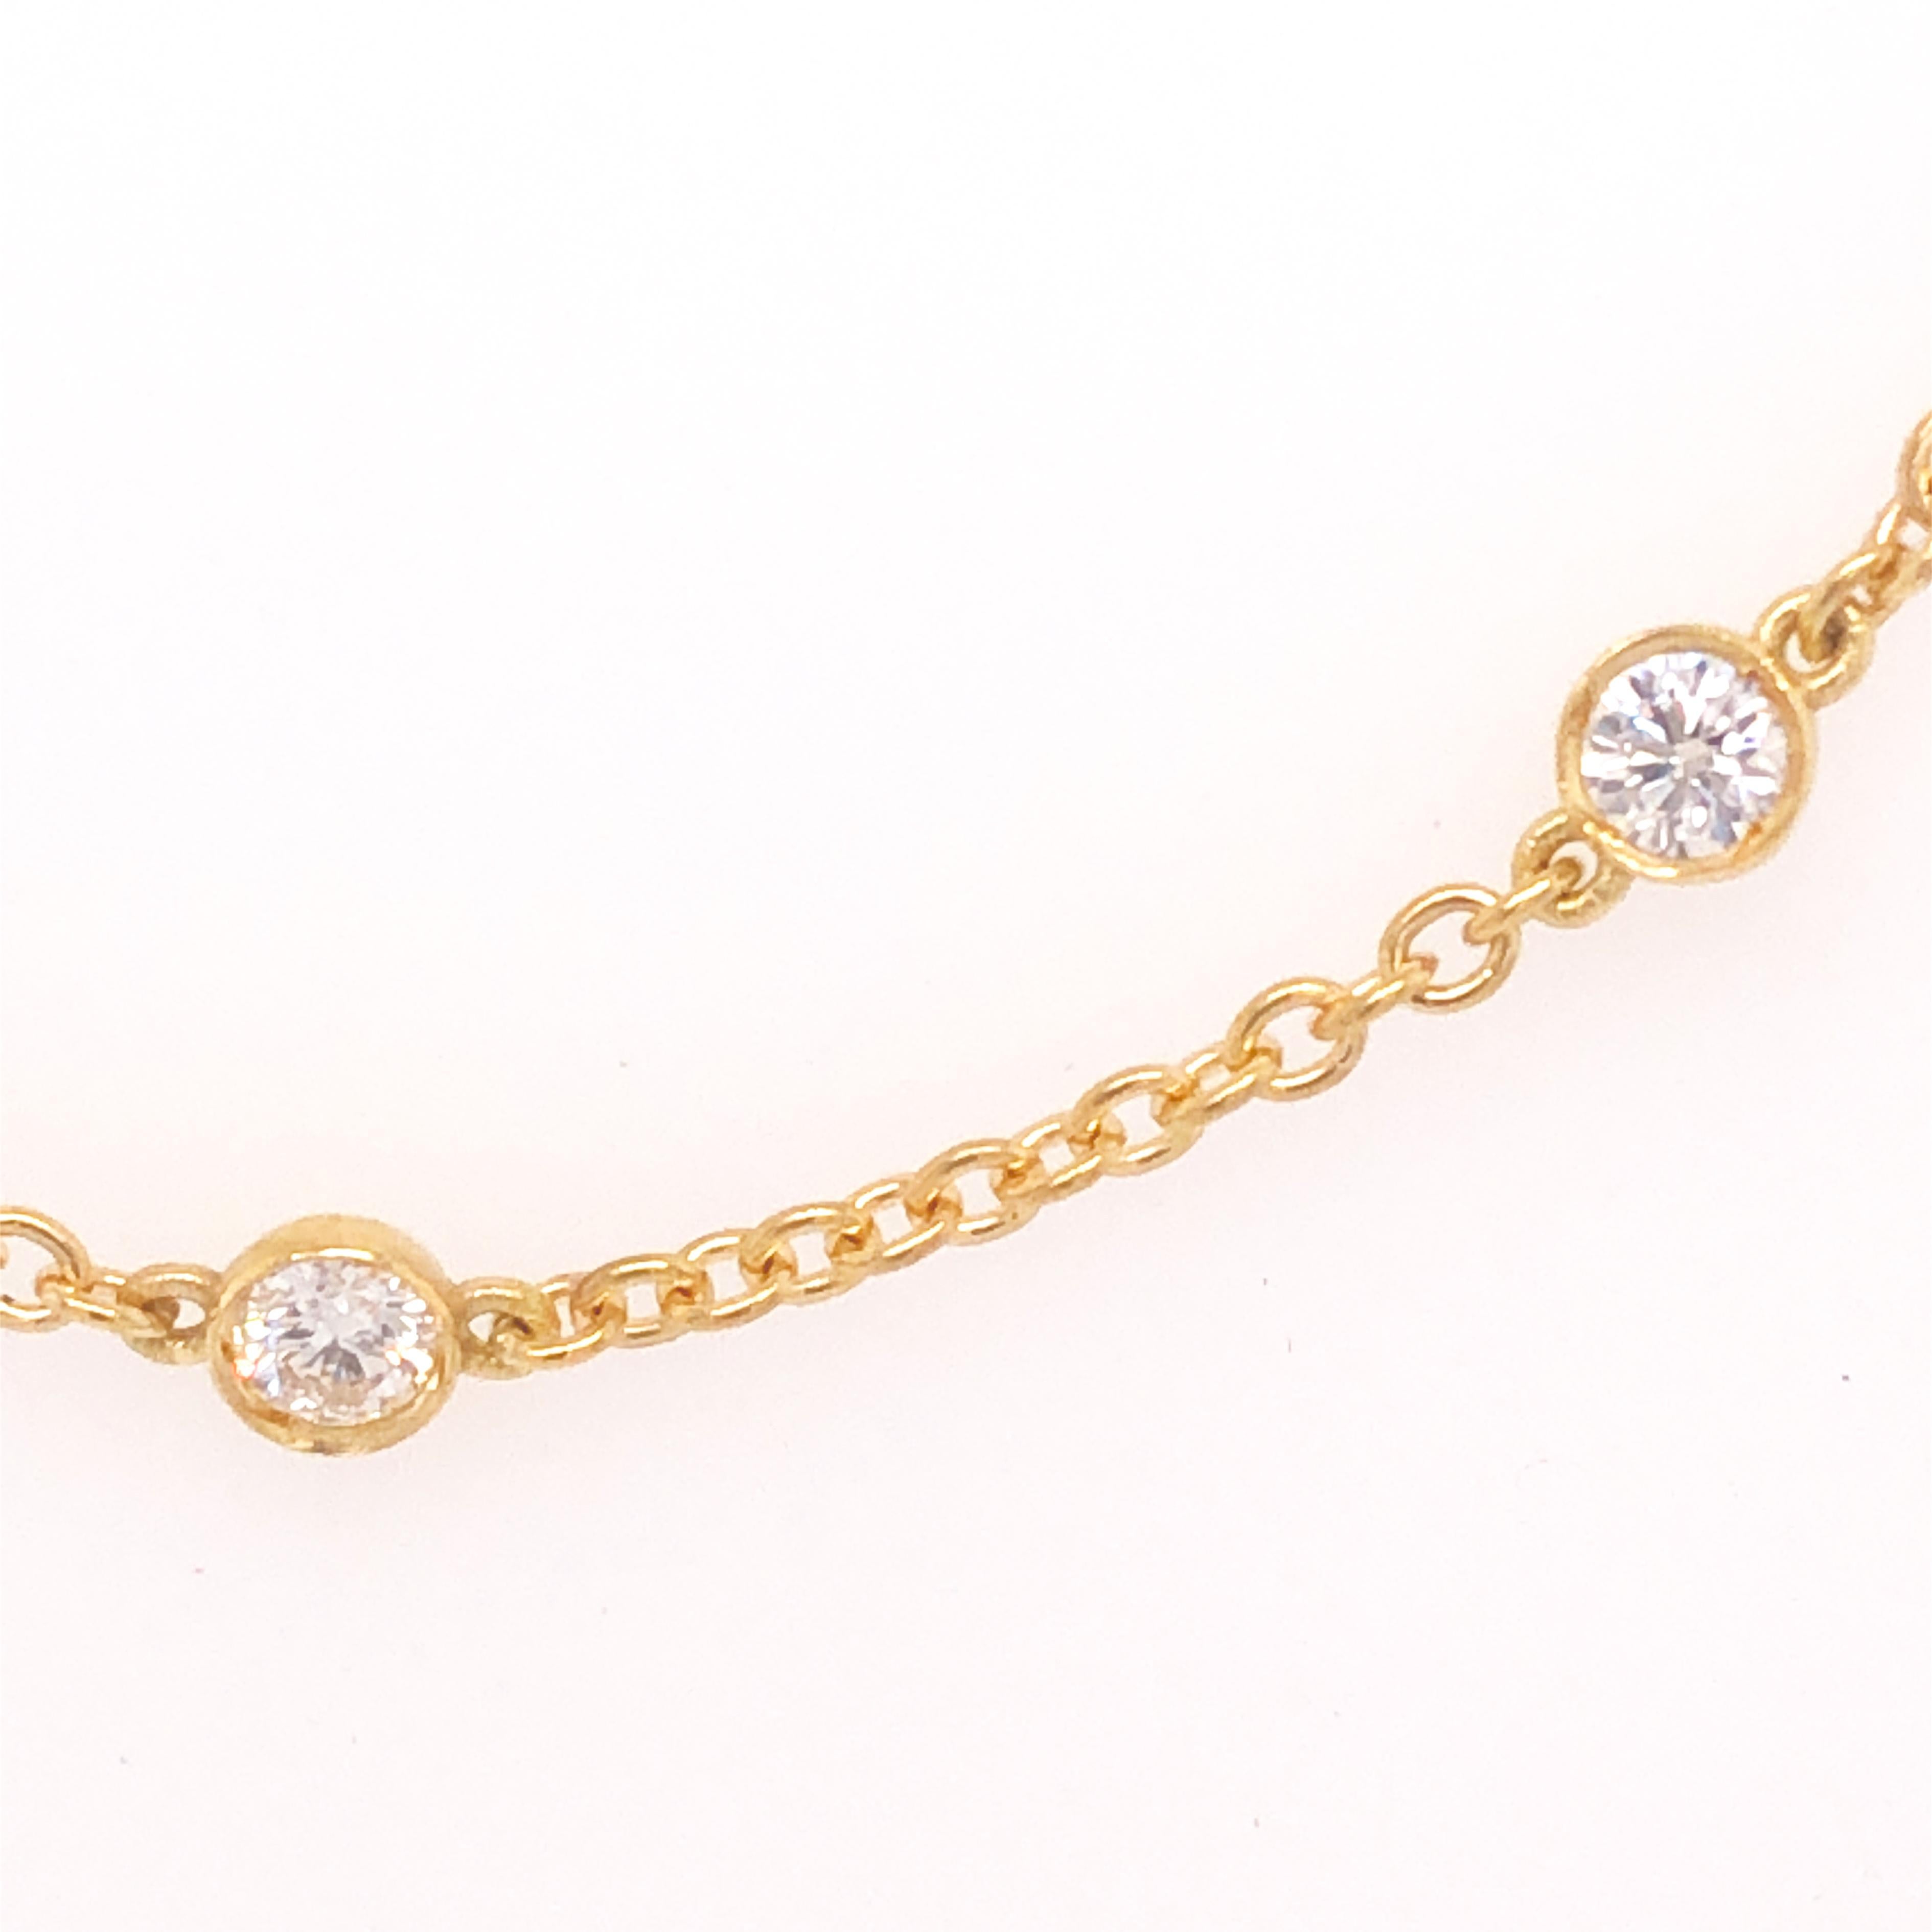 Original 1985, Extremely Rare Cartier Diamonds by the Yard 18Kt Yellow Gold 17.32 inches(44cm) Necklace: Cartier develops the idea of deploying exceptional diamonds into a minimalist design.
A simple, all time wearable yellow chain is interlinked